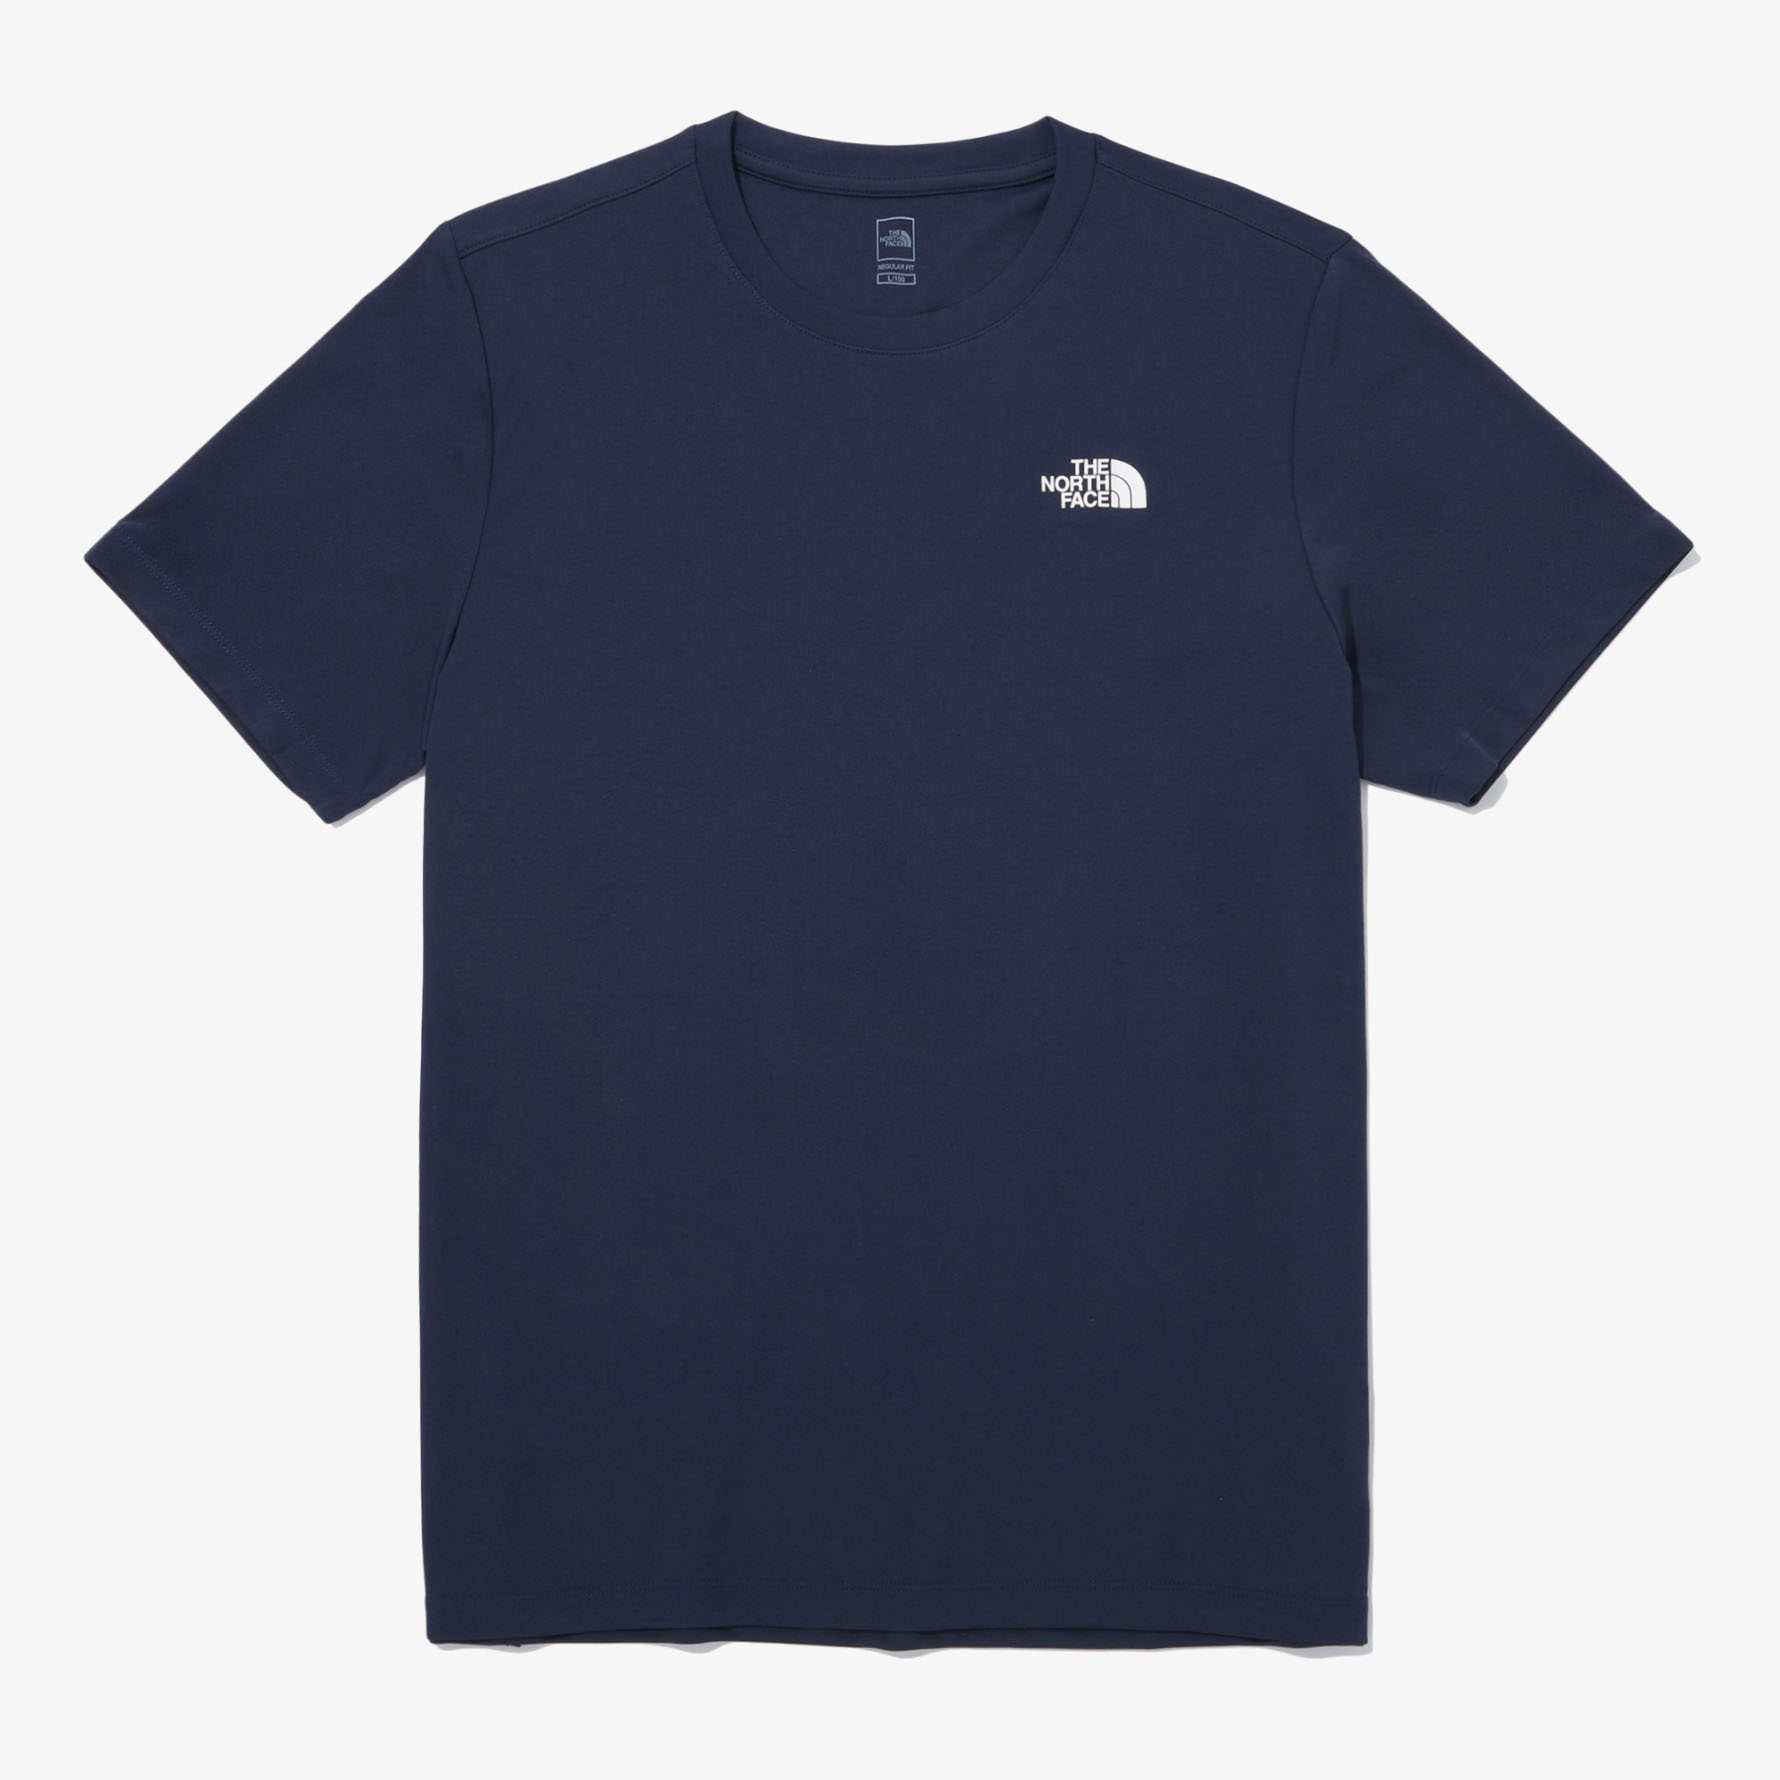 THE NORTH FACE Tシャツ M'S RECOVERY S/S R/TEE リカバリー 半袖Tシャツ ロゴT ベーシックフィット NAVY KHAKI CHARCOAL BLUE BLACK 半袖 NT7UQ06A/B/C/D/E｜a-dot｜02